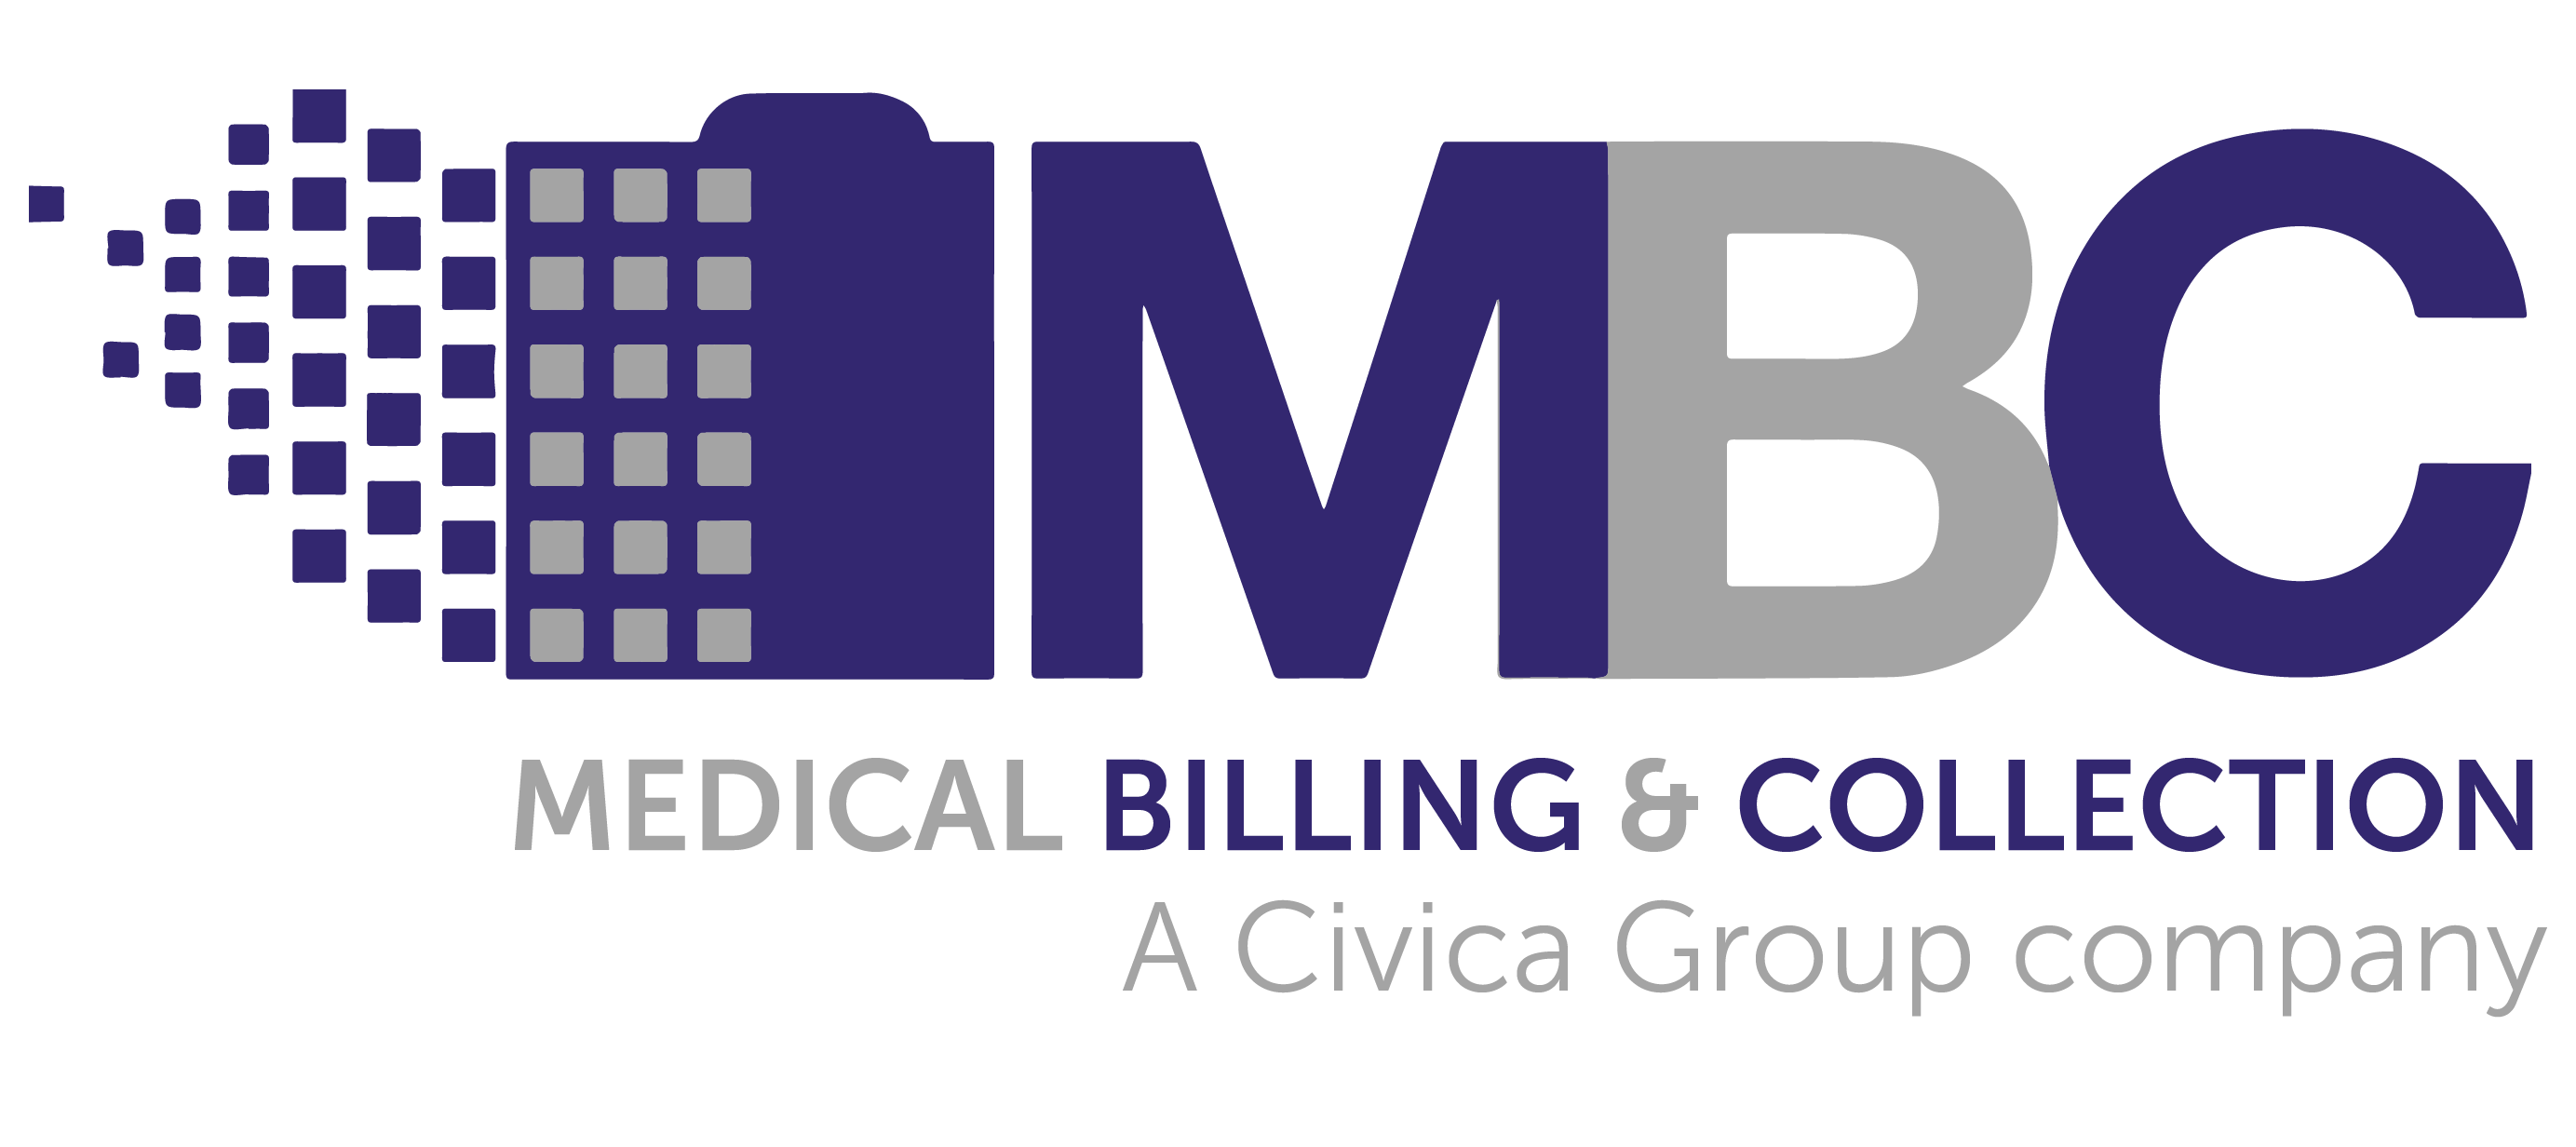 Medical Billing & Collection white